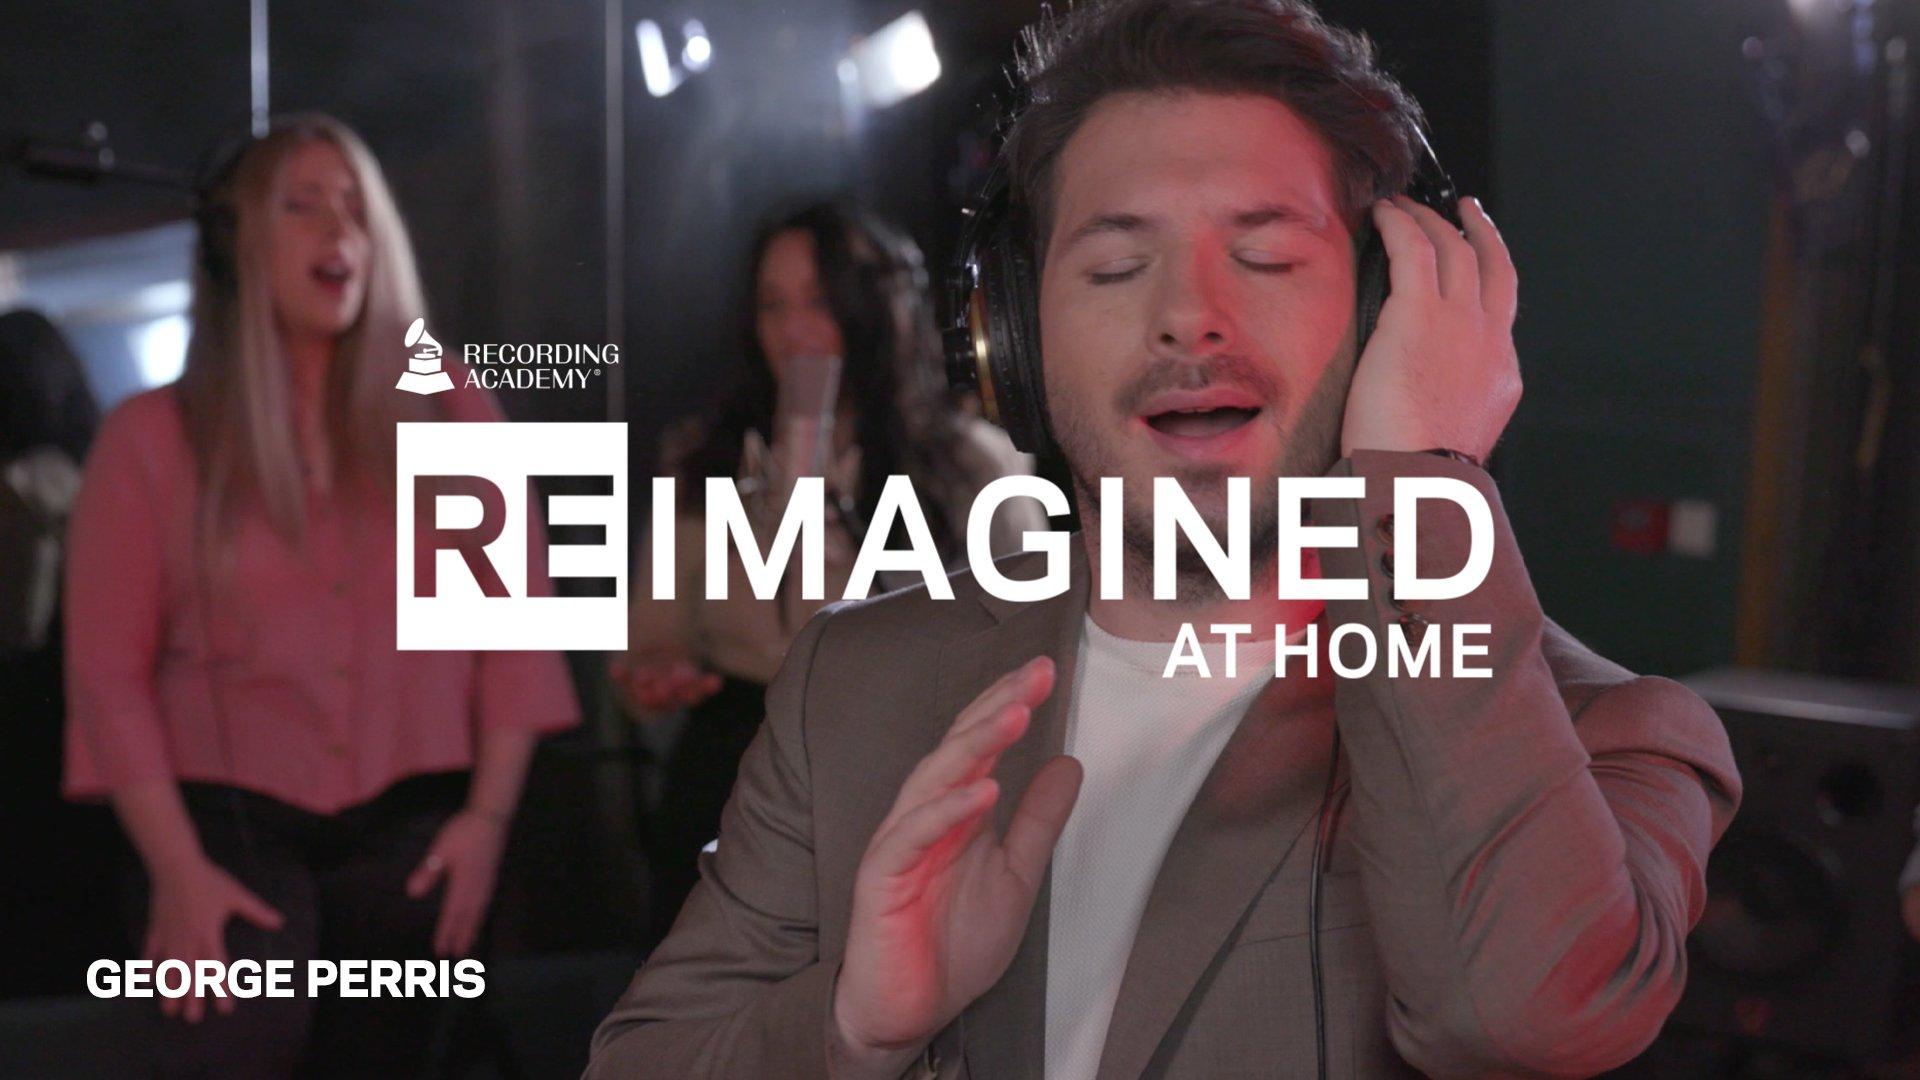 Watch George Perris Gorgeously Cover Mariah Carey's 1997 Classic "Butterfly" | ReImagined At Home